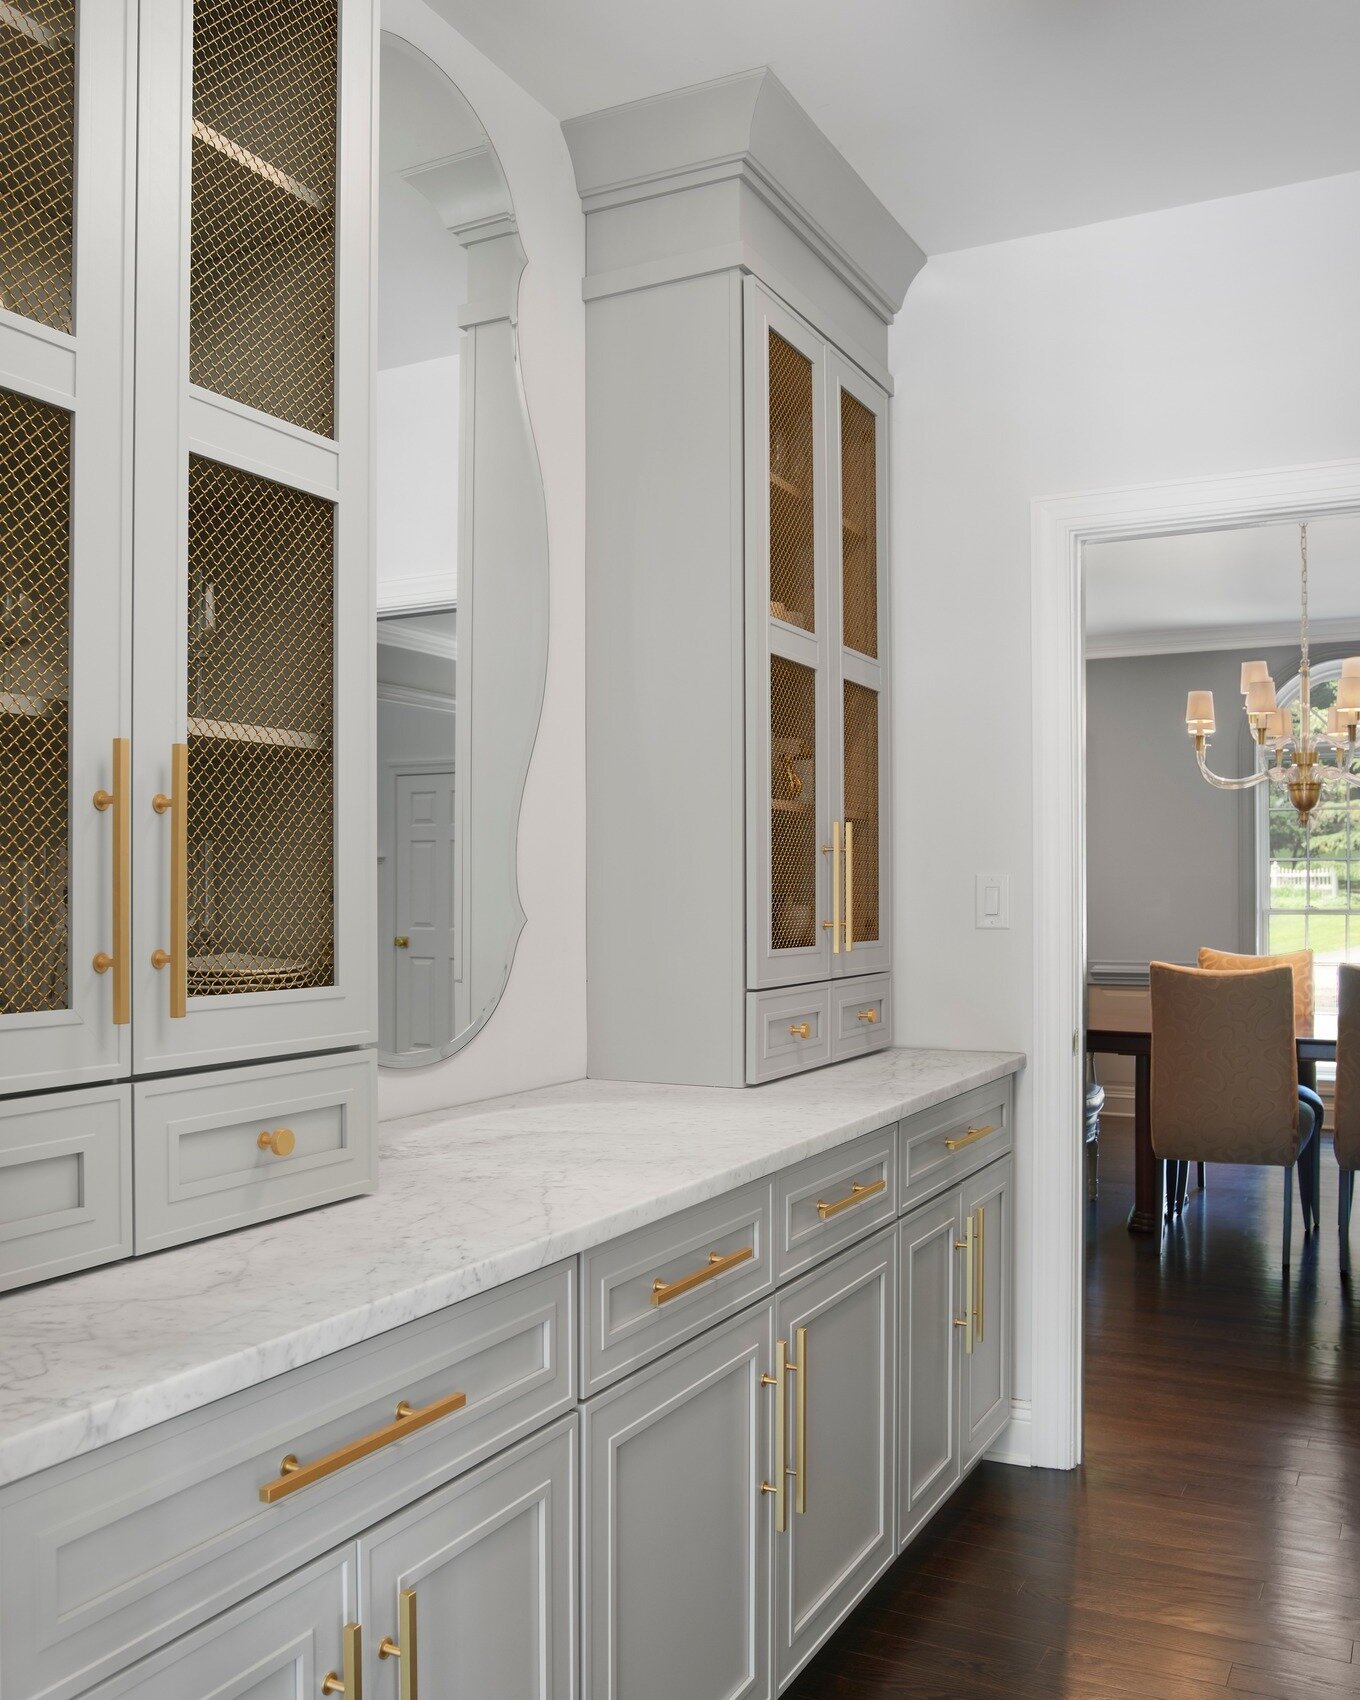 Built-in cabinery isn't just for the kitchen!  Whether it be the office, the butler's pantry, the basement, or the living room, built-in cabinetry can really take a room to the next level. 
.
.
.
#builtin #builtins #builtincabinets  #builtincabinetry